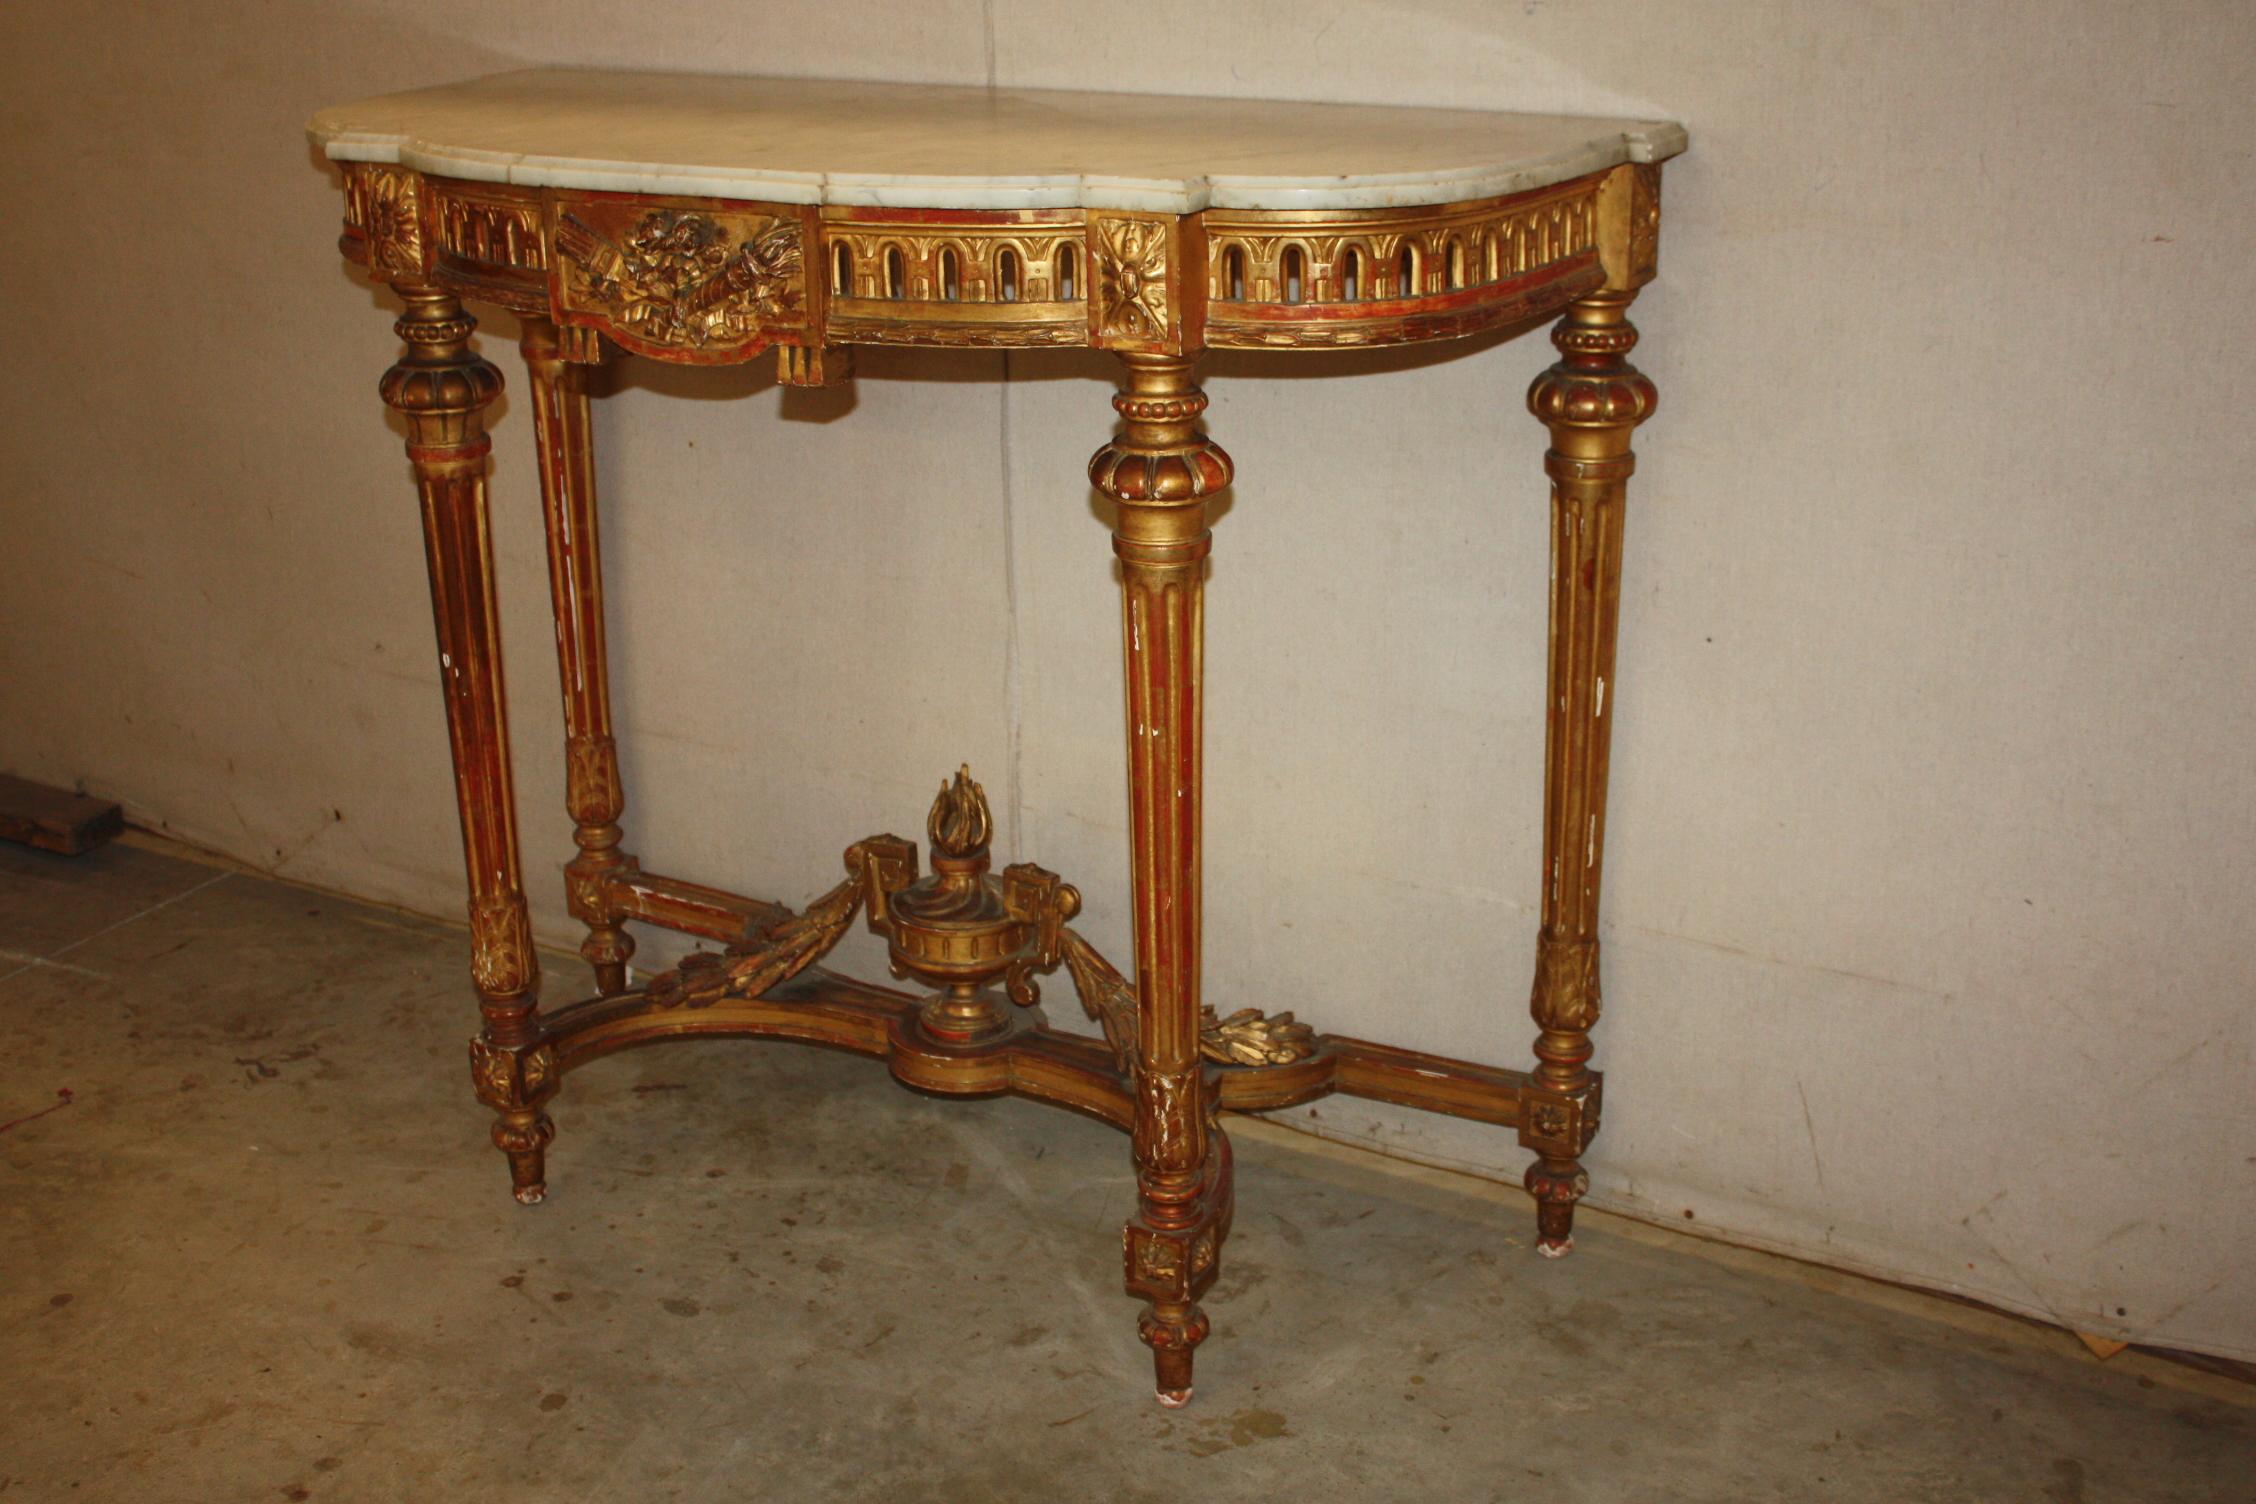 19th century French painted Louis XVI console with wonderful worn painted finish and faux marble top.